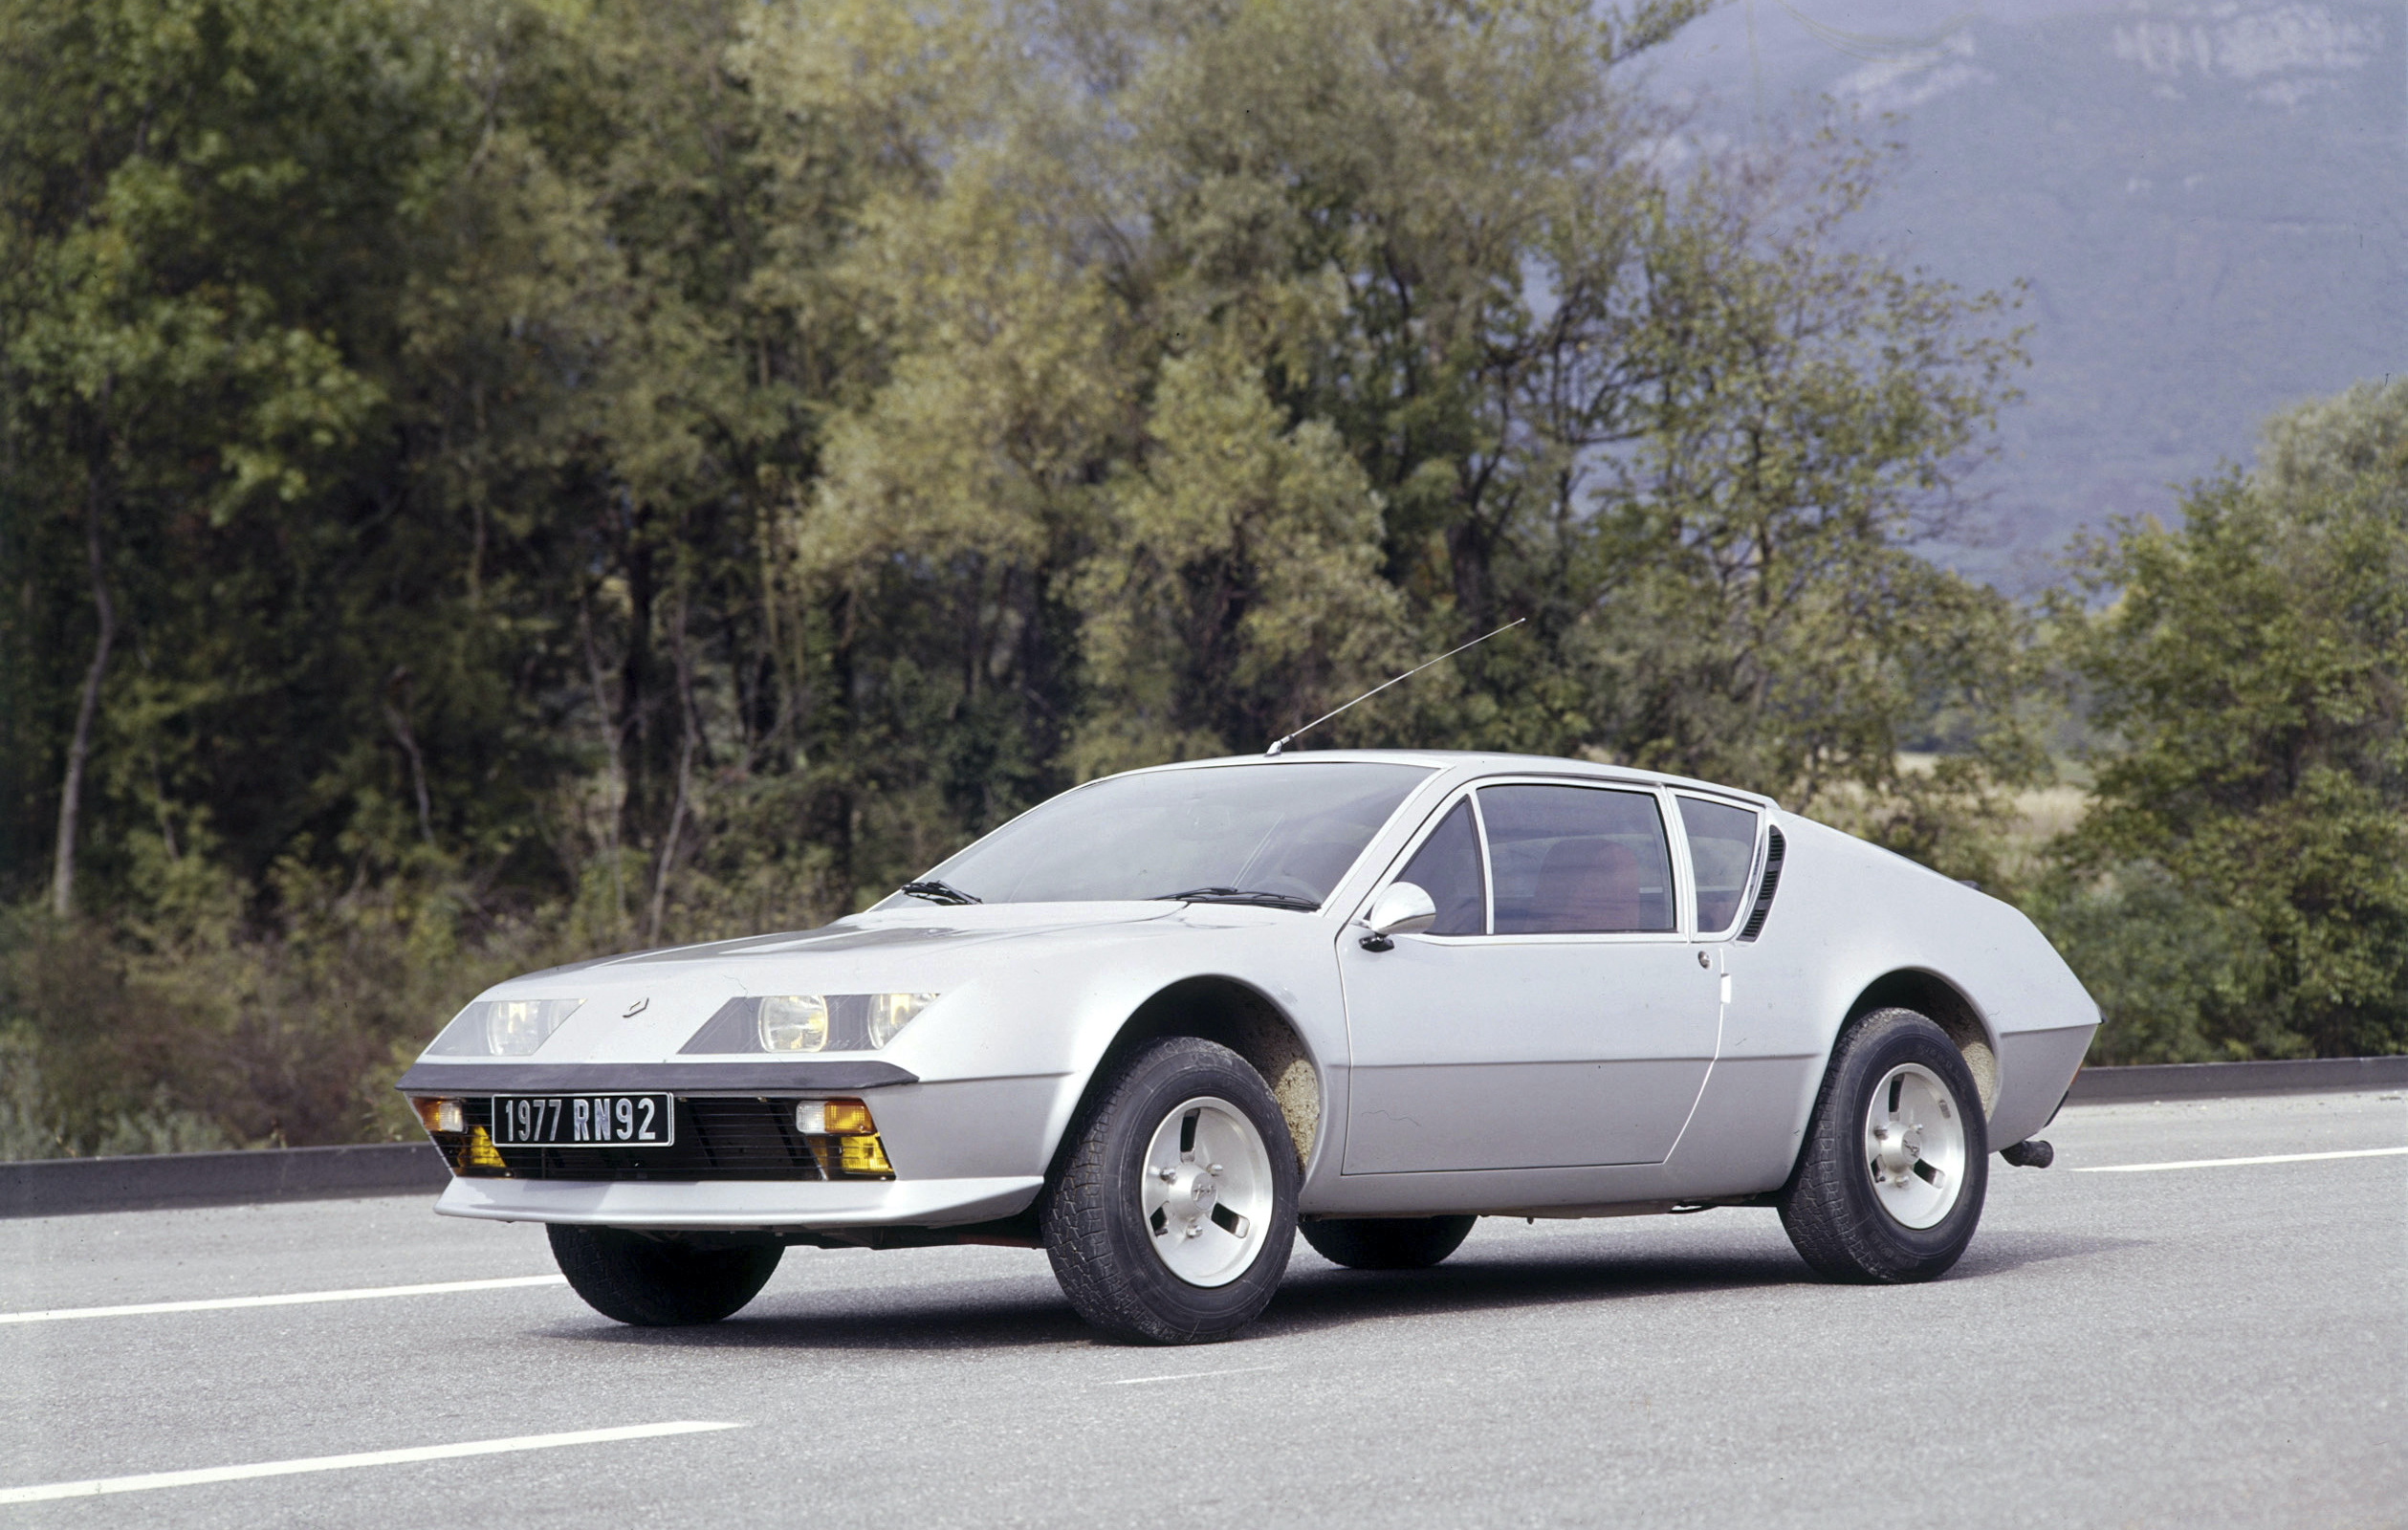 Test your automotive anniversary knowledge in our latest quiz